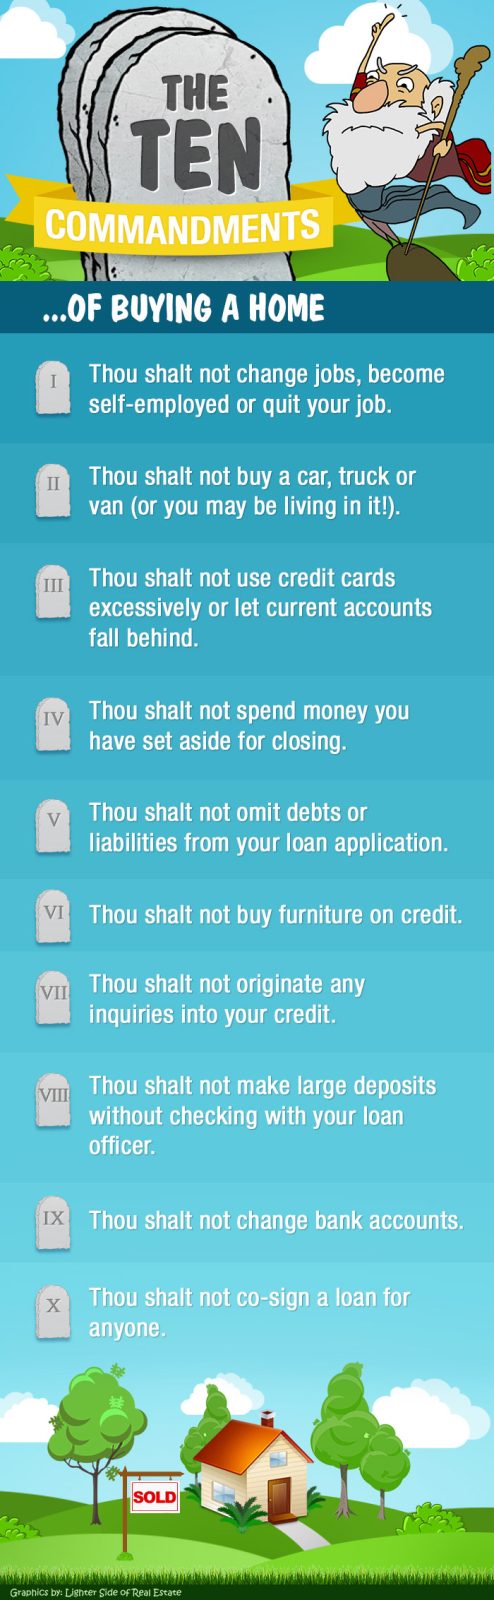 10 commandments of buying a home